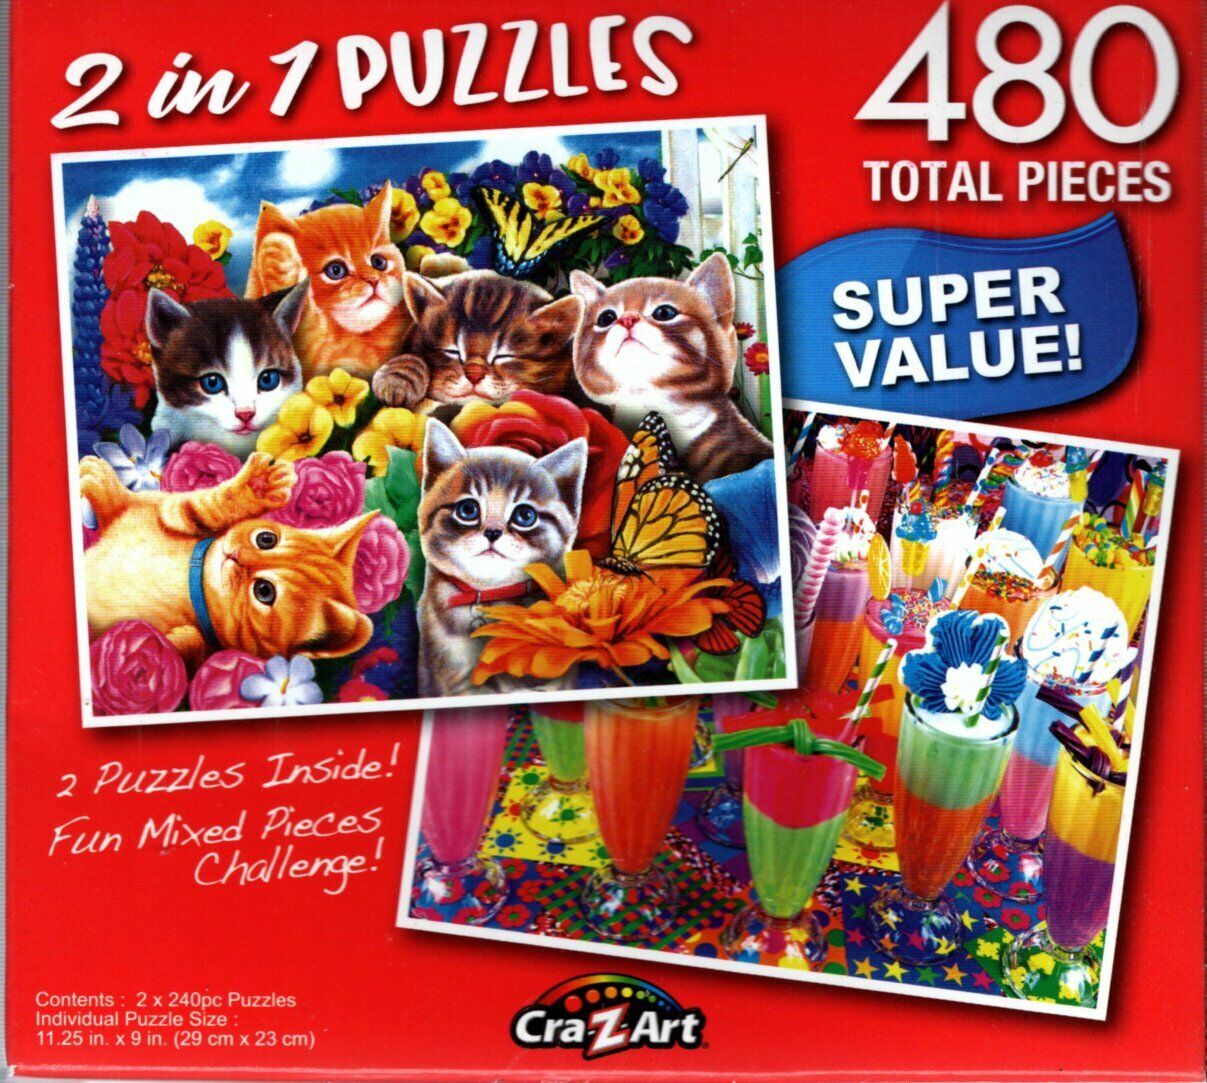 Playtime in the Garden / Sugary Shakes - 480 Piece 2 in 1 Puzzles